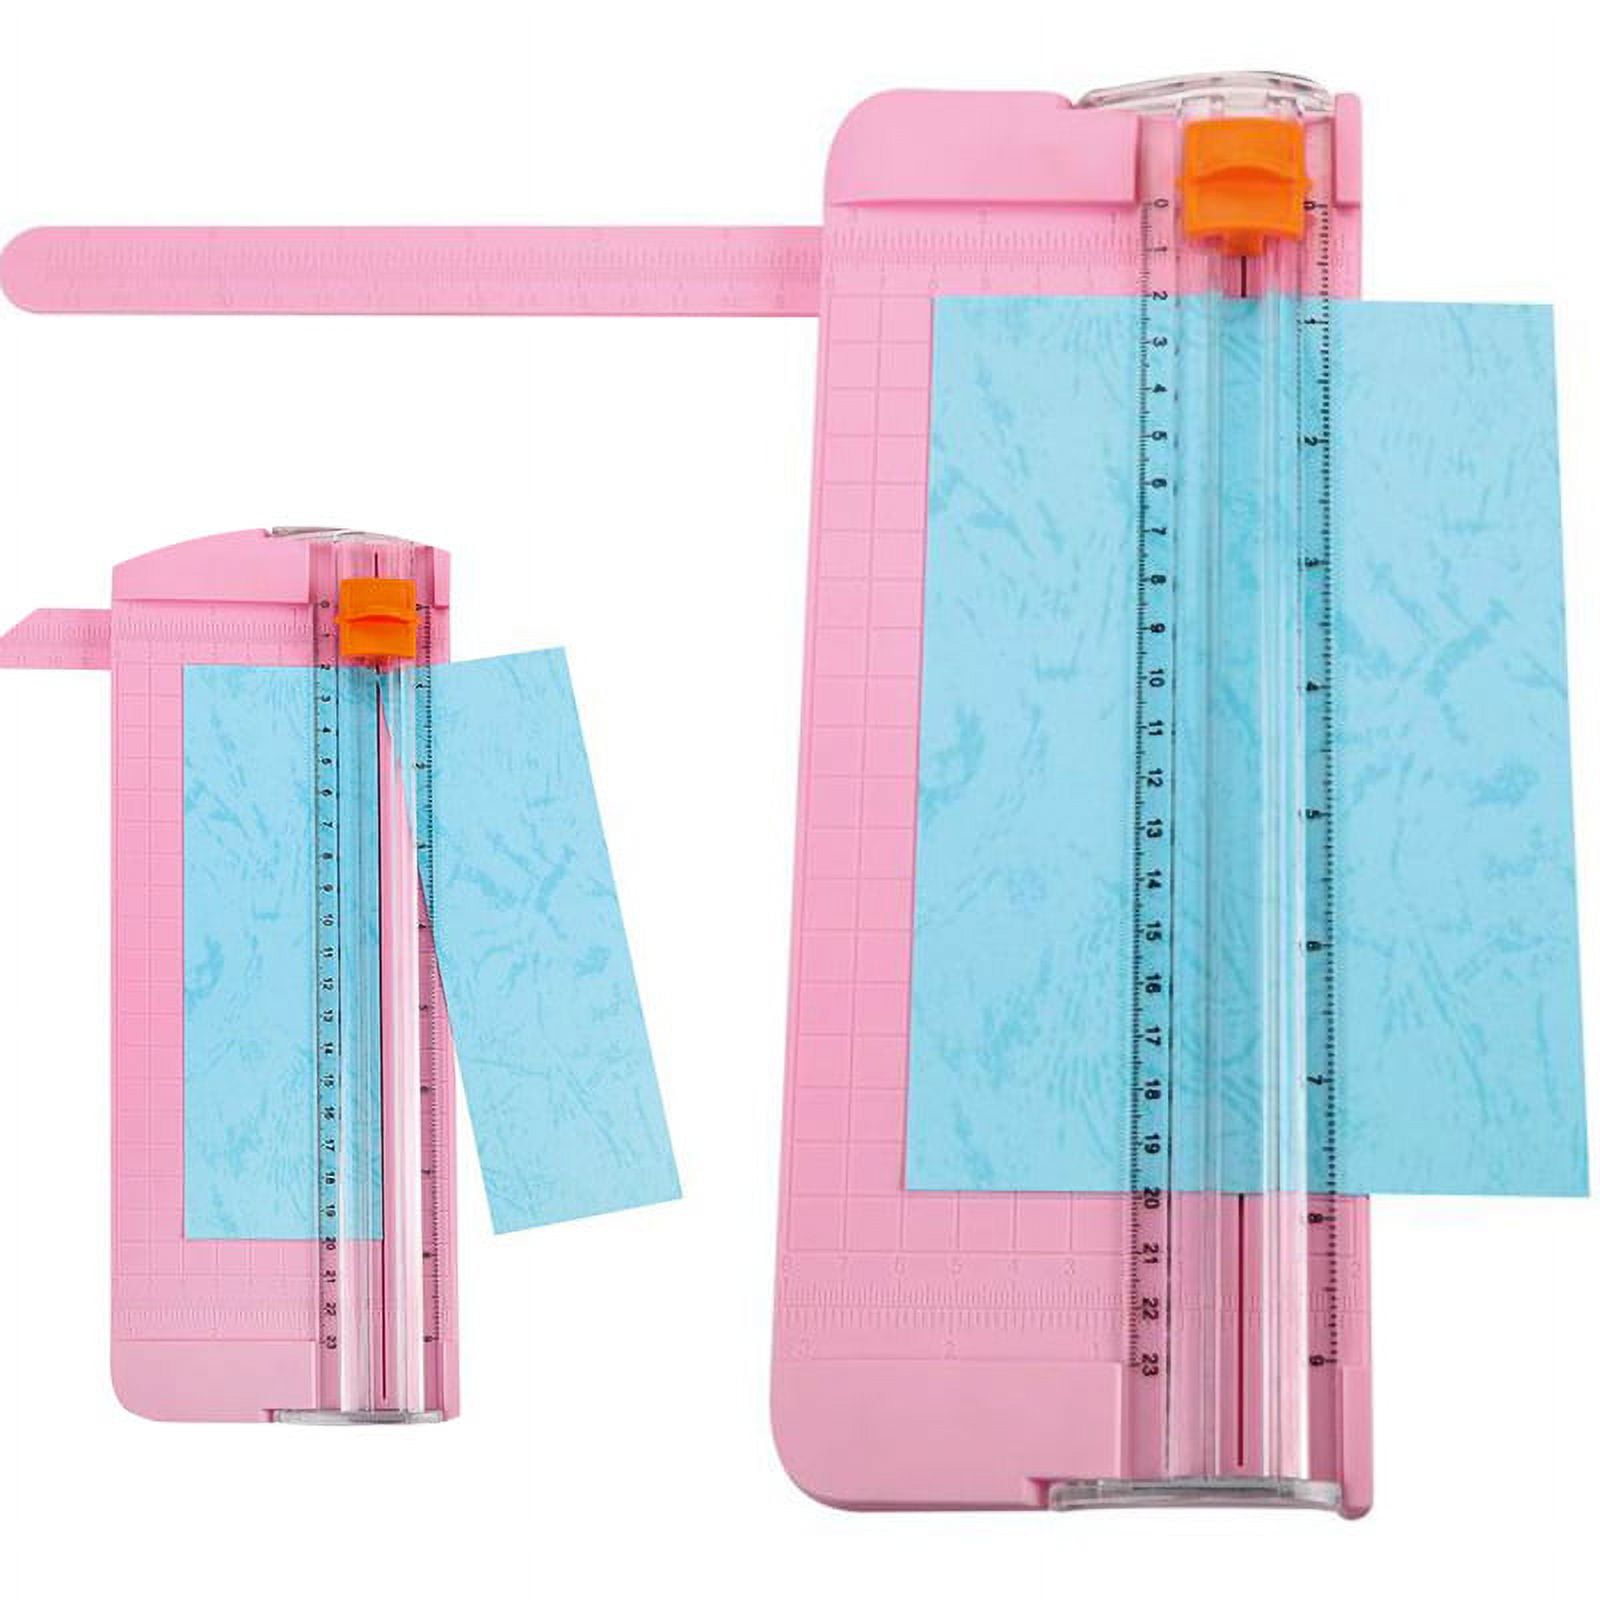 1 Pc A5 Paper Cutter Trimmer with Ruler for Photo Guillotine Cutting - Mini  and Light - Scrapbook Making Mini Cutter Trimmer Tool